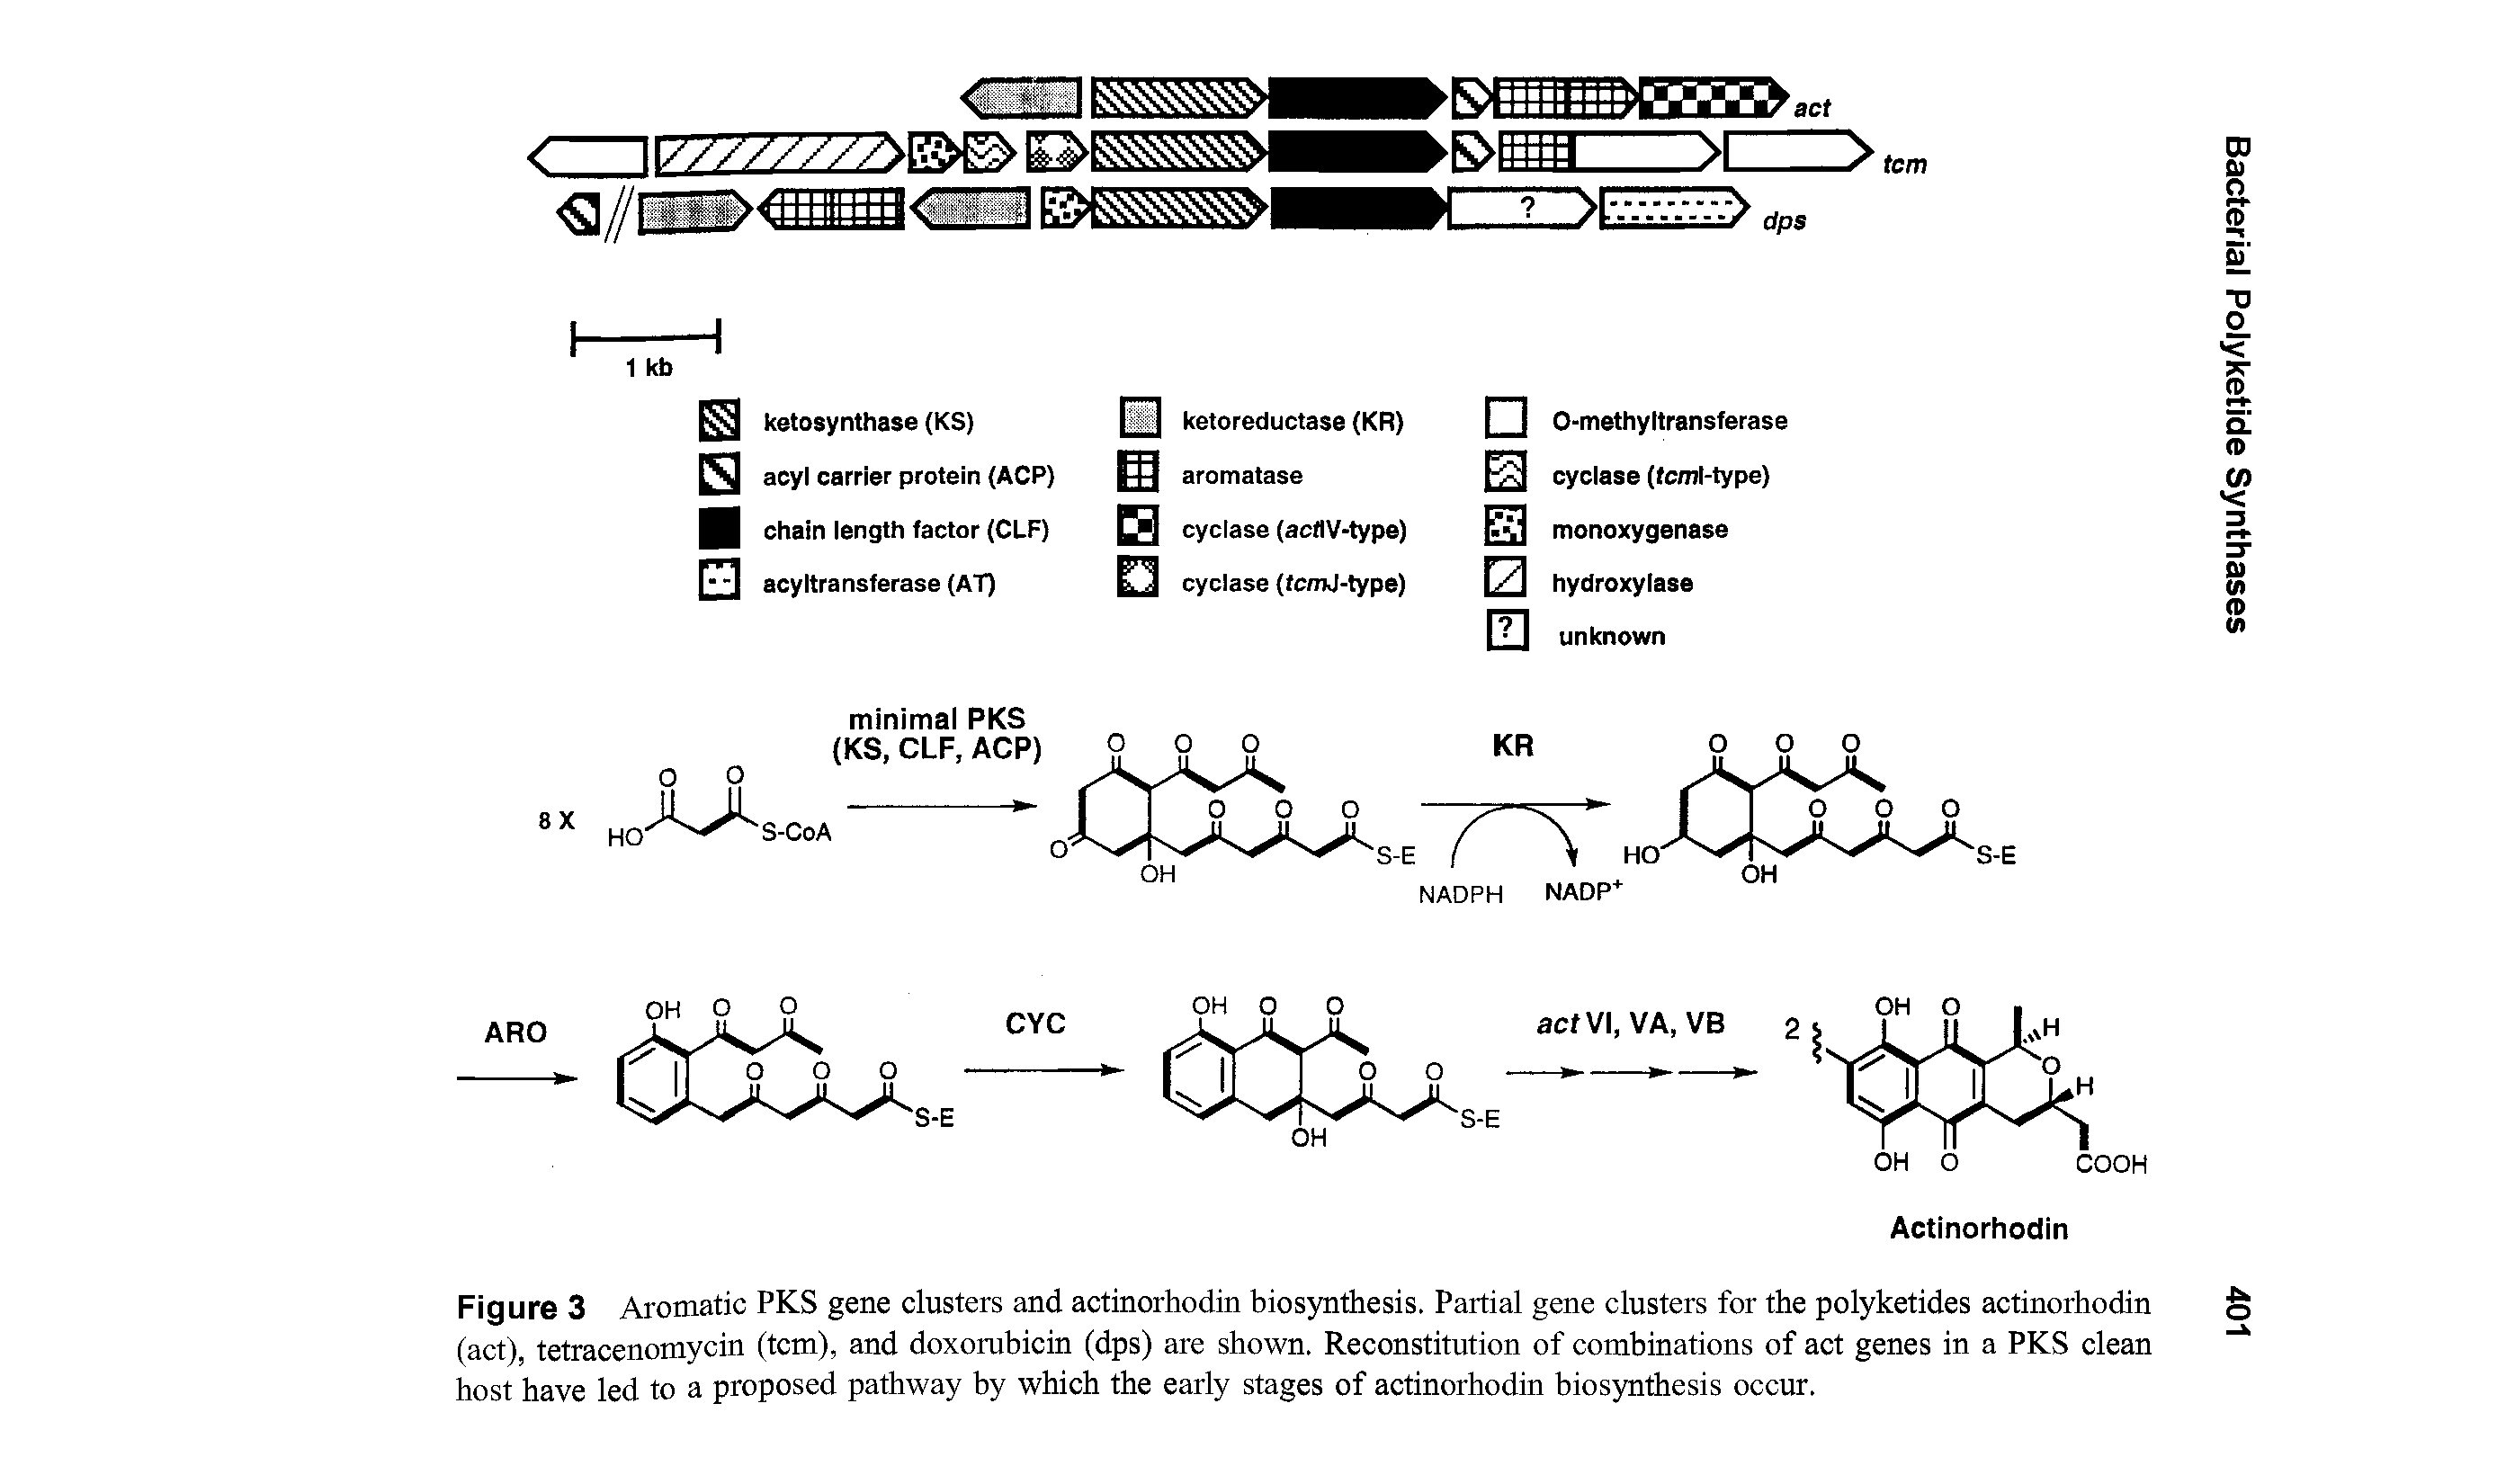 Figure 3 Aromatic PKS gene clusters and actinorhodin biosynthesis. Partial gene clusters for the polyketides actinorhodin (act), tetracenomycin (tcm), and doxorubicin (dps) are shown. Reconstitution of combinations of act genes in a PKS clean host have led to a proposed pathway by which the early stages of actinorhodin biosynthesis occur.